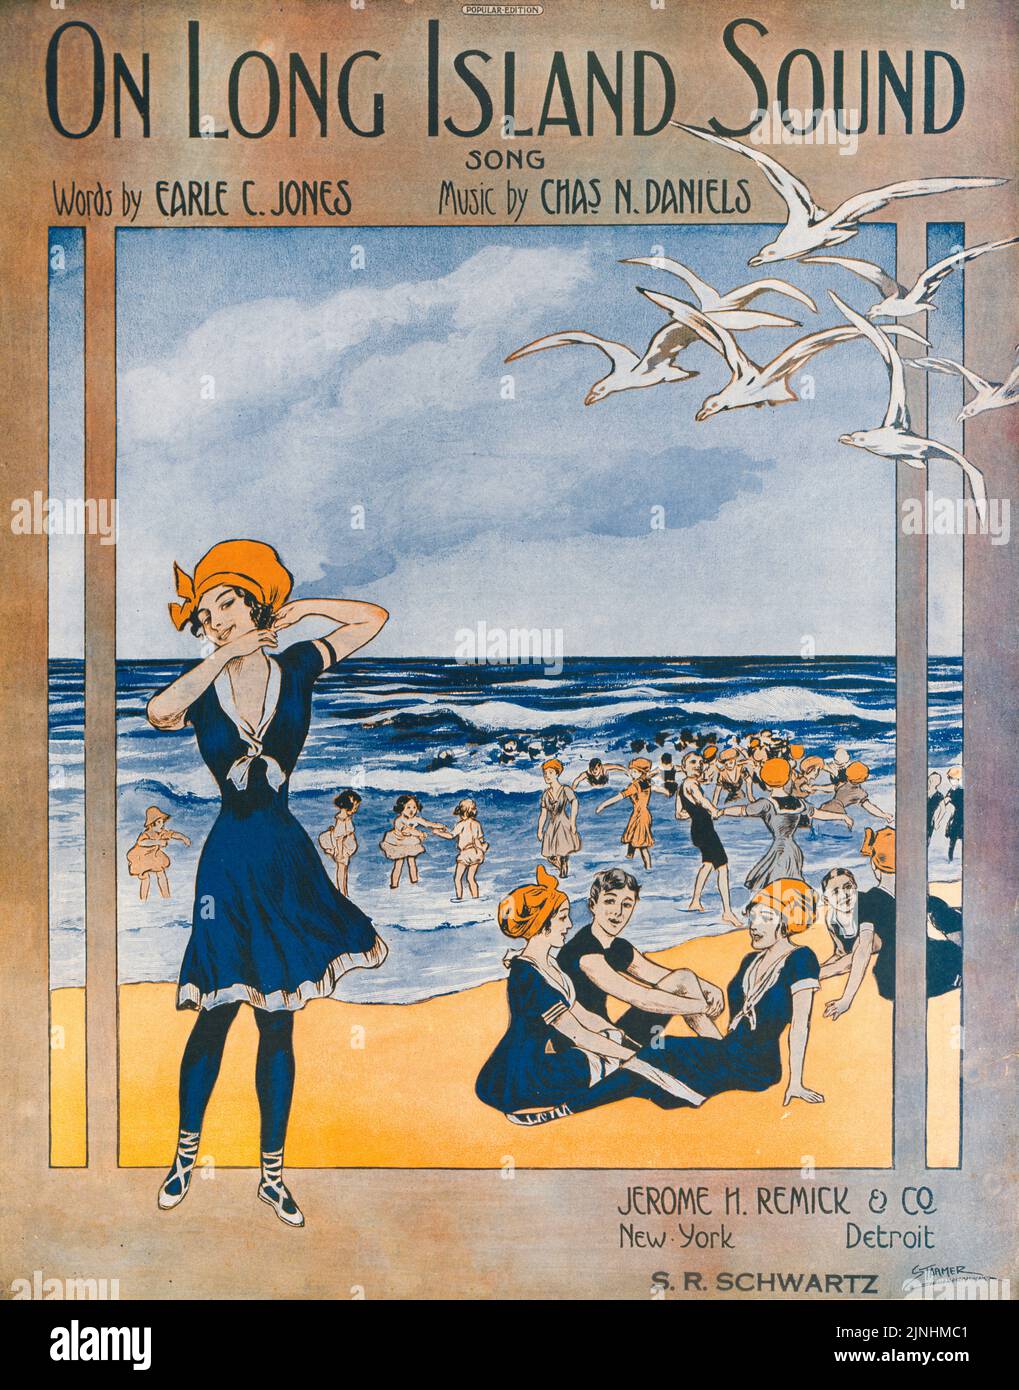 On Long Island Sound (1912) Words by Earle C. Jones, Music by Charles N. Daniels, Published by Jerome H. Remick and Company. Sheet music cover. Illustration by Starmer Stock Photo